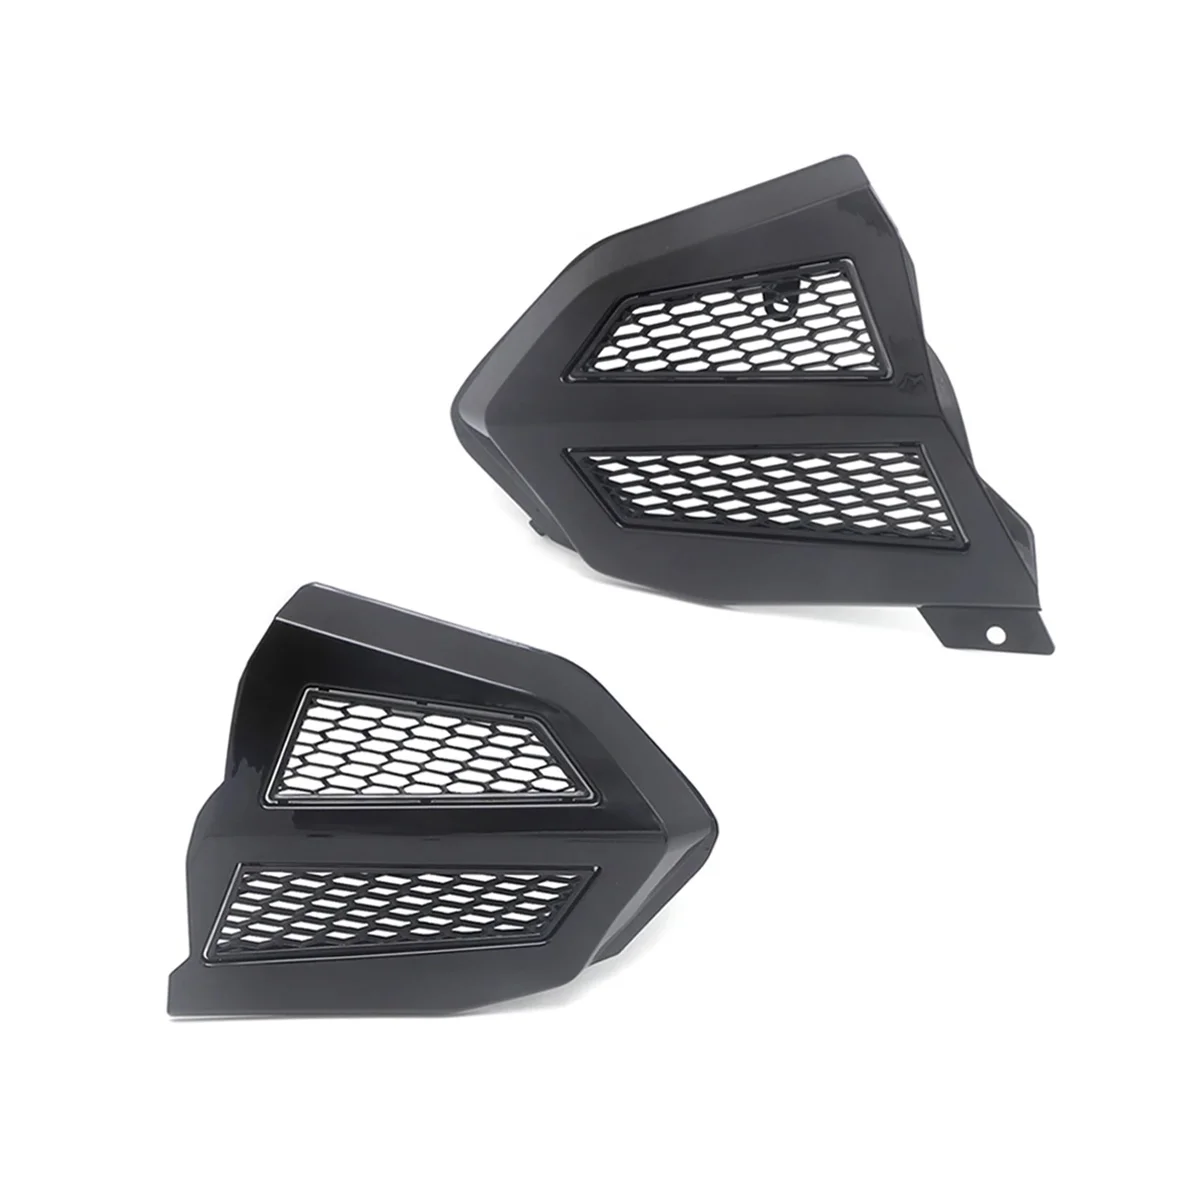 

Motorcycle Engine Transmission Covers for Honda Goldwing GL1800 F6B 2018-2021 Fairing Radiator Grille Cover(Black)